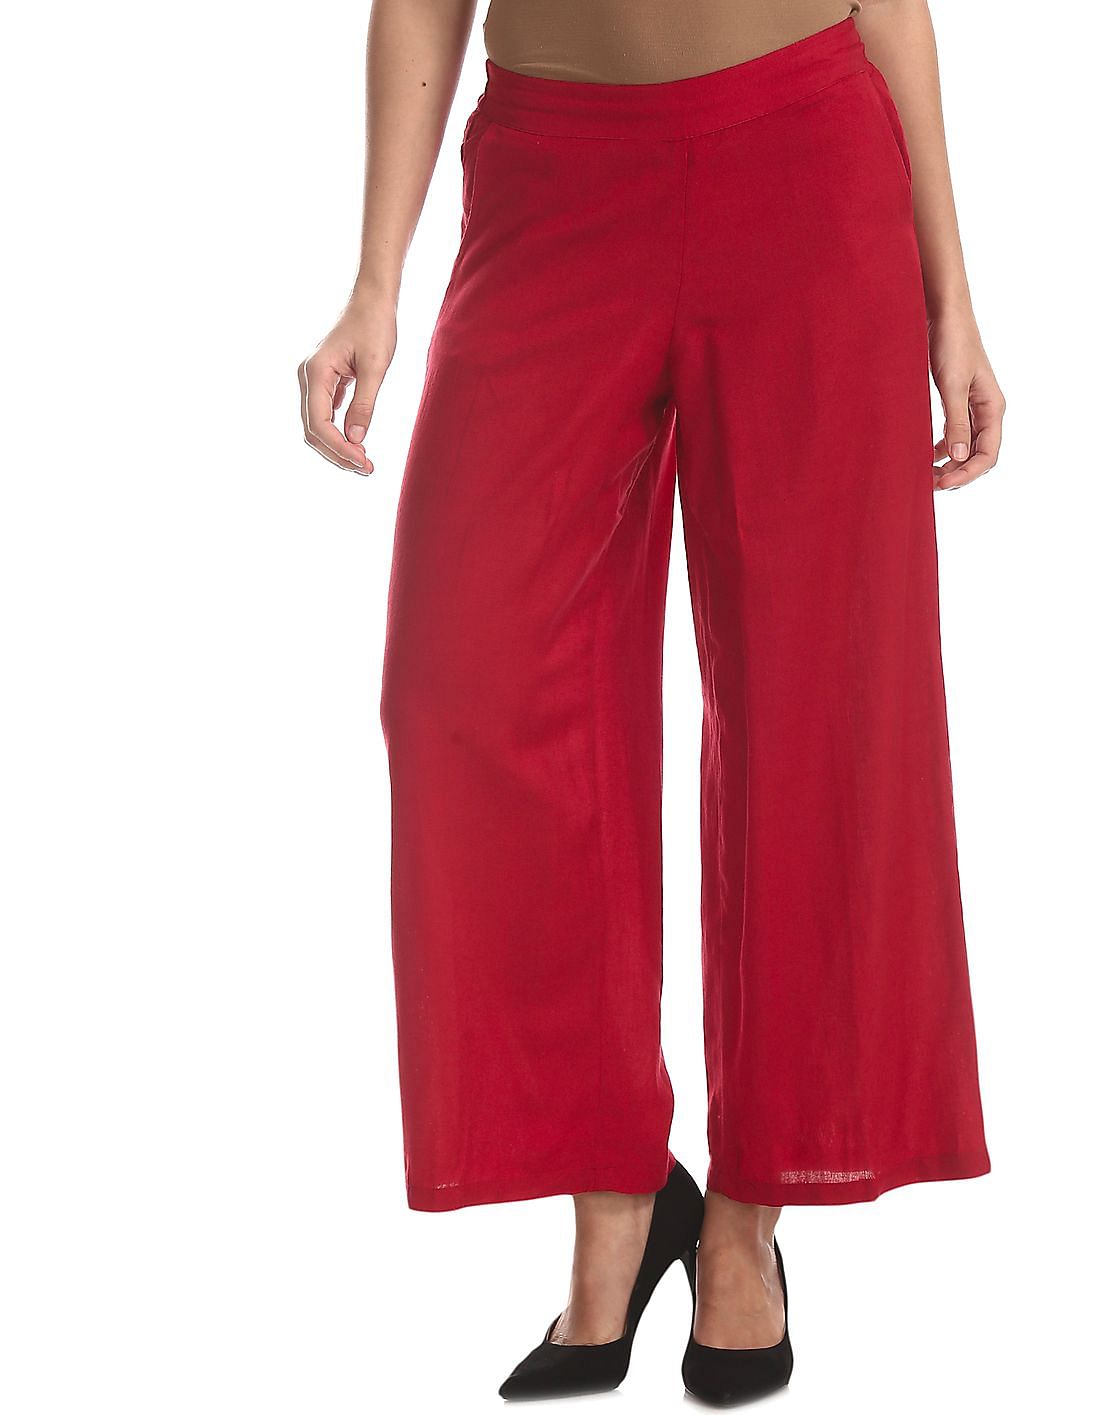 Buy Bronz Red Solid Woven Palazzos - NNNOW.com